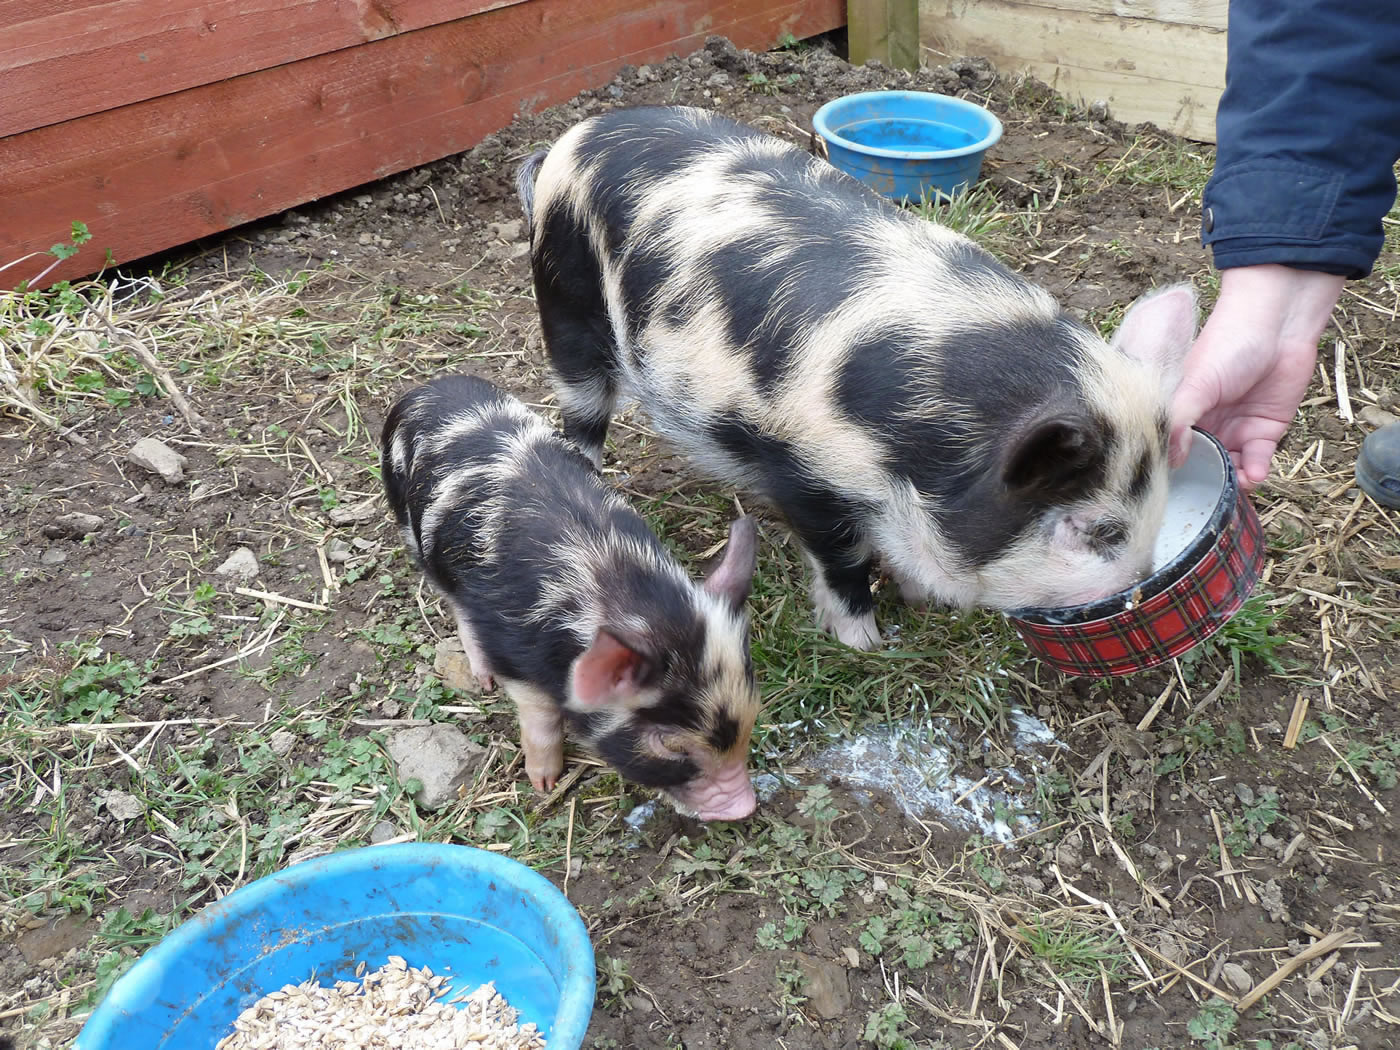 Picture of Pet pigs Geordie and Buddy getting fed while out in their outdoor run.